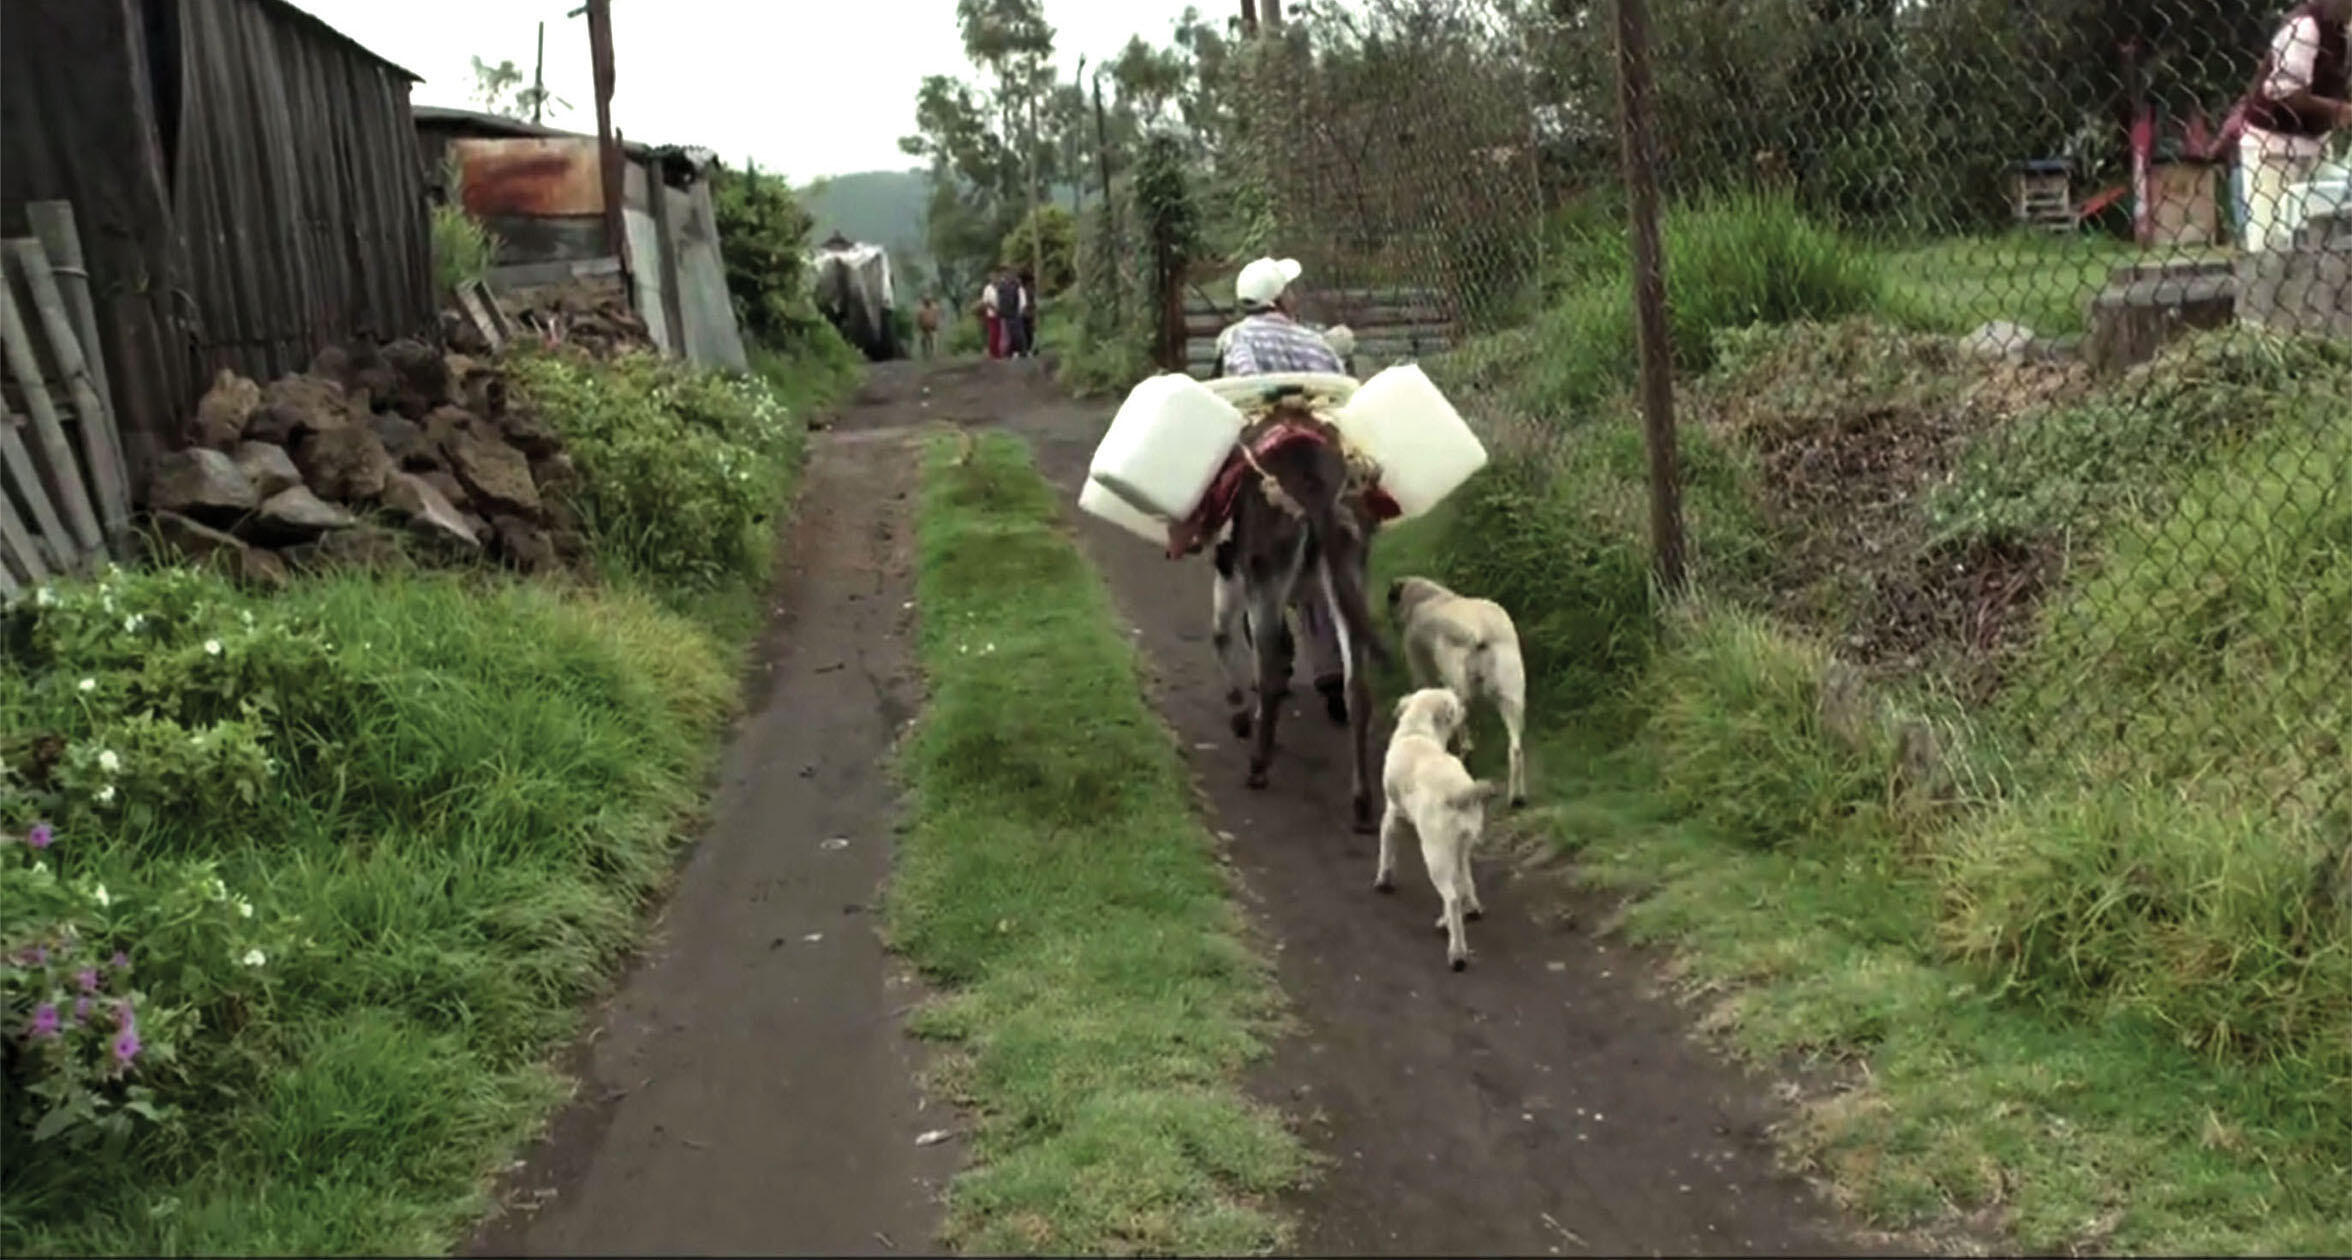 A screen shot from “H2Omx” shows a man leading his donkey to fetch water on the outskirts of Mexico City. (Photo courtesy of Icarus Films.)